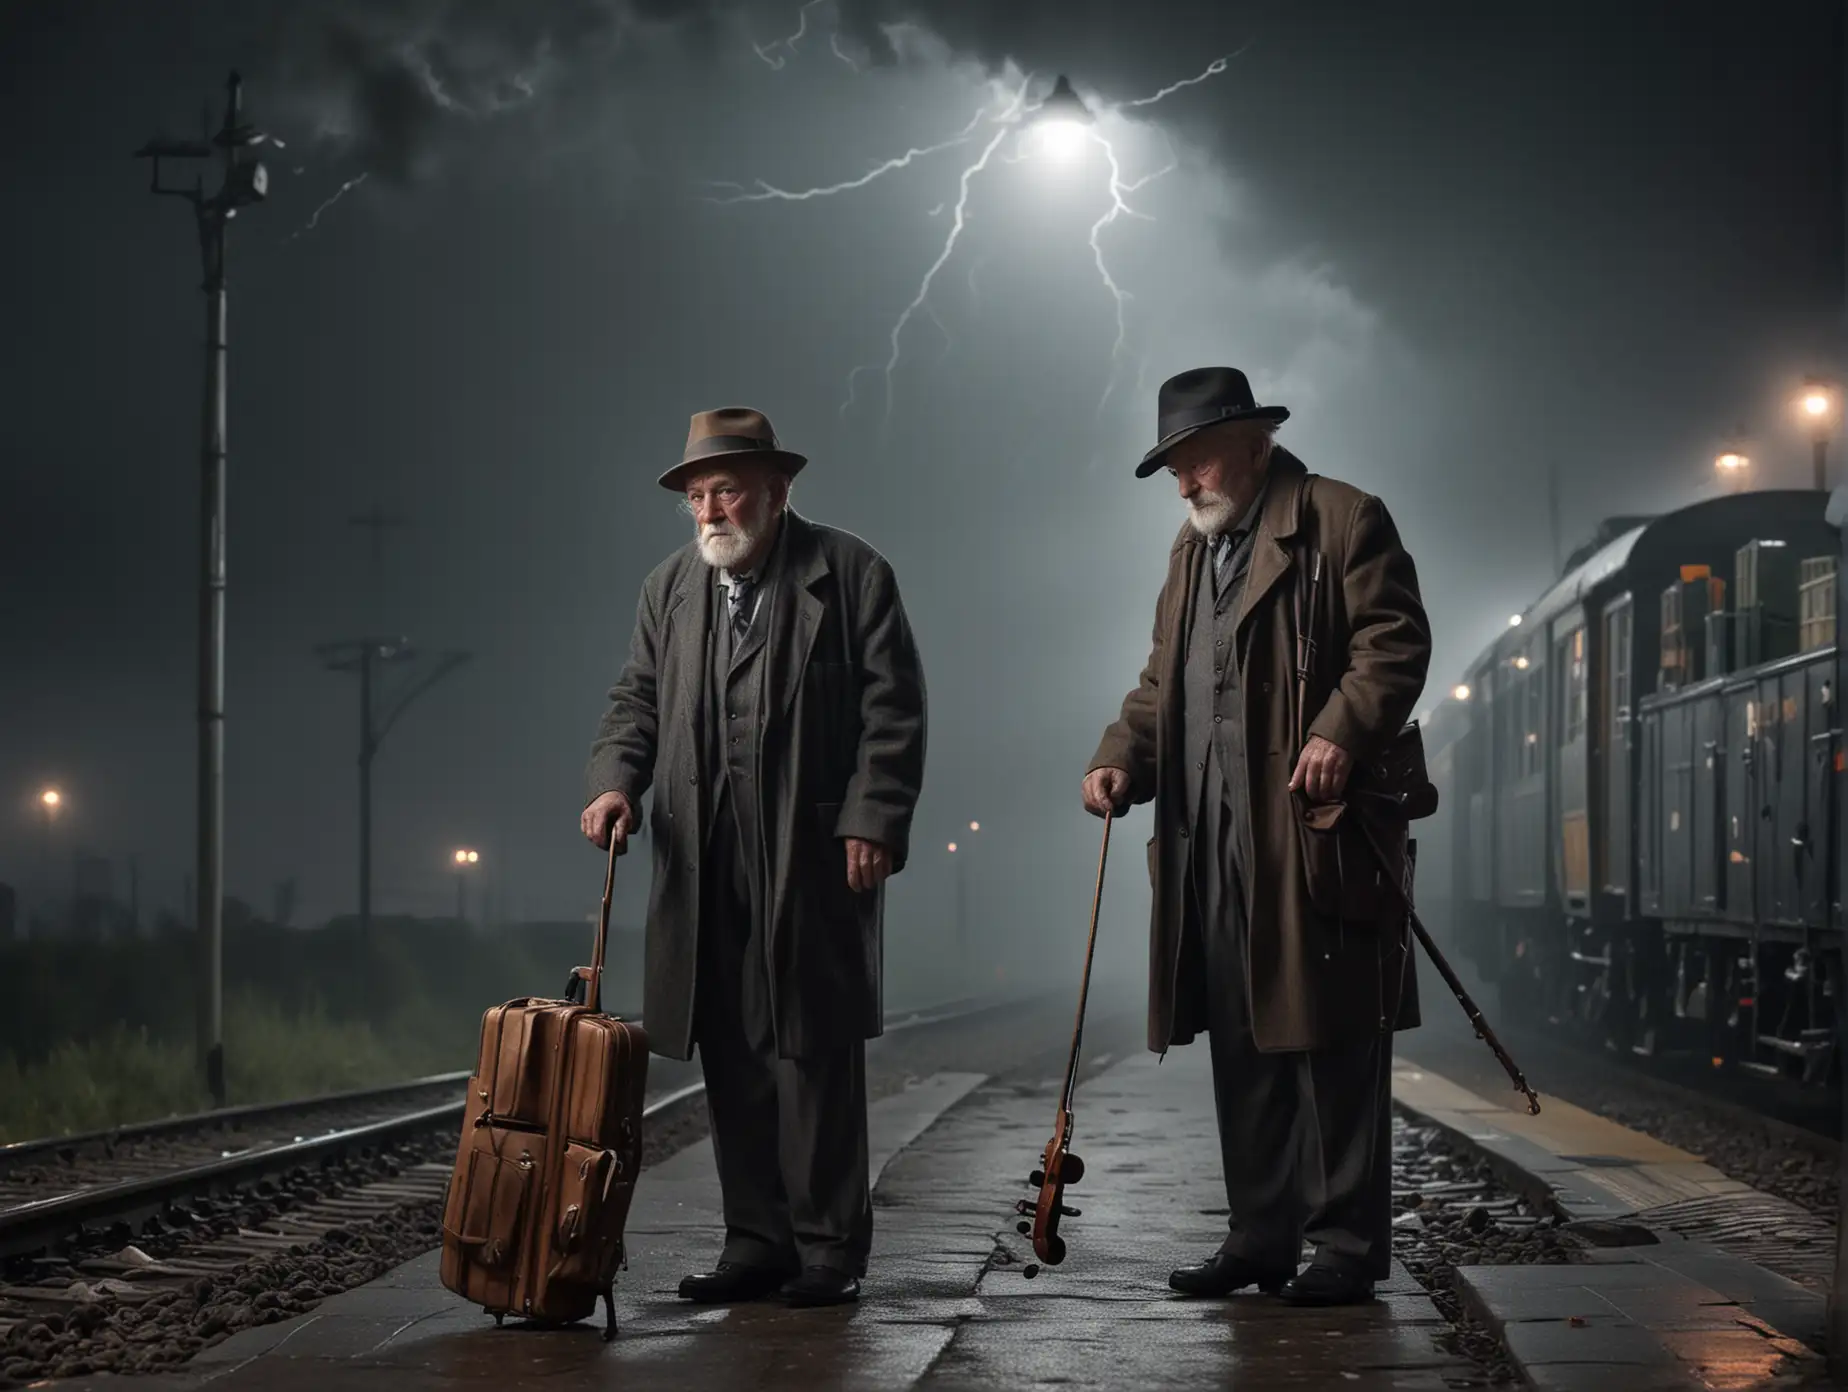 old man in a hat with a cane and a violin case standing under a light waiting for a train late at night with lightning in the sky